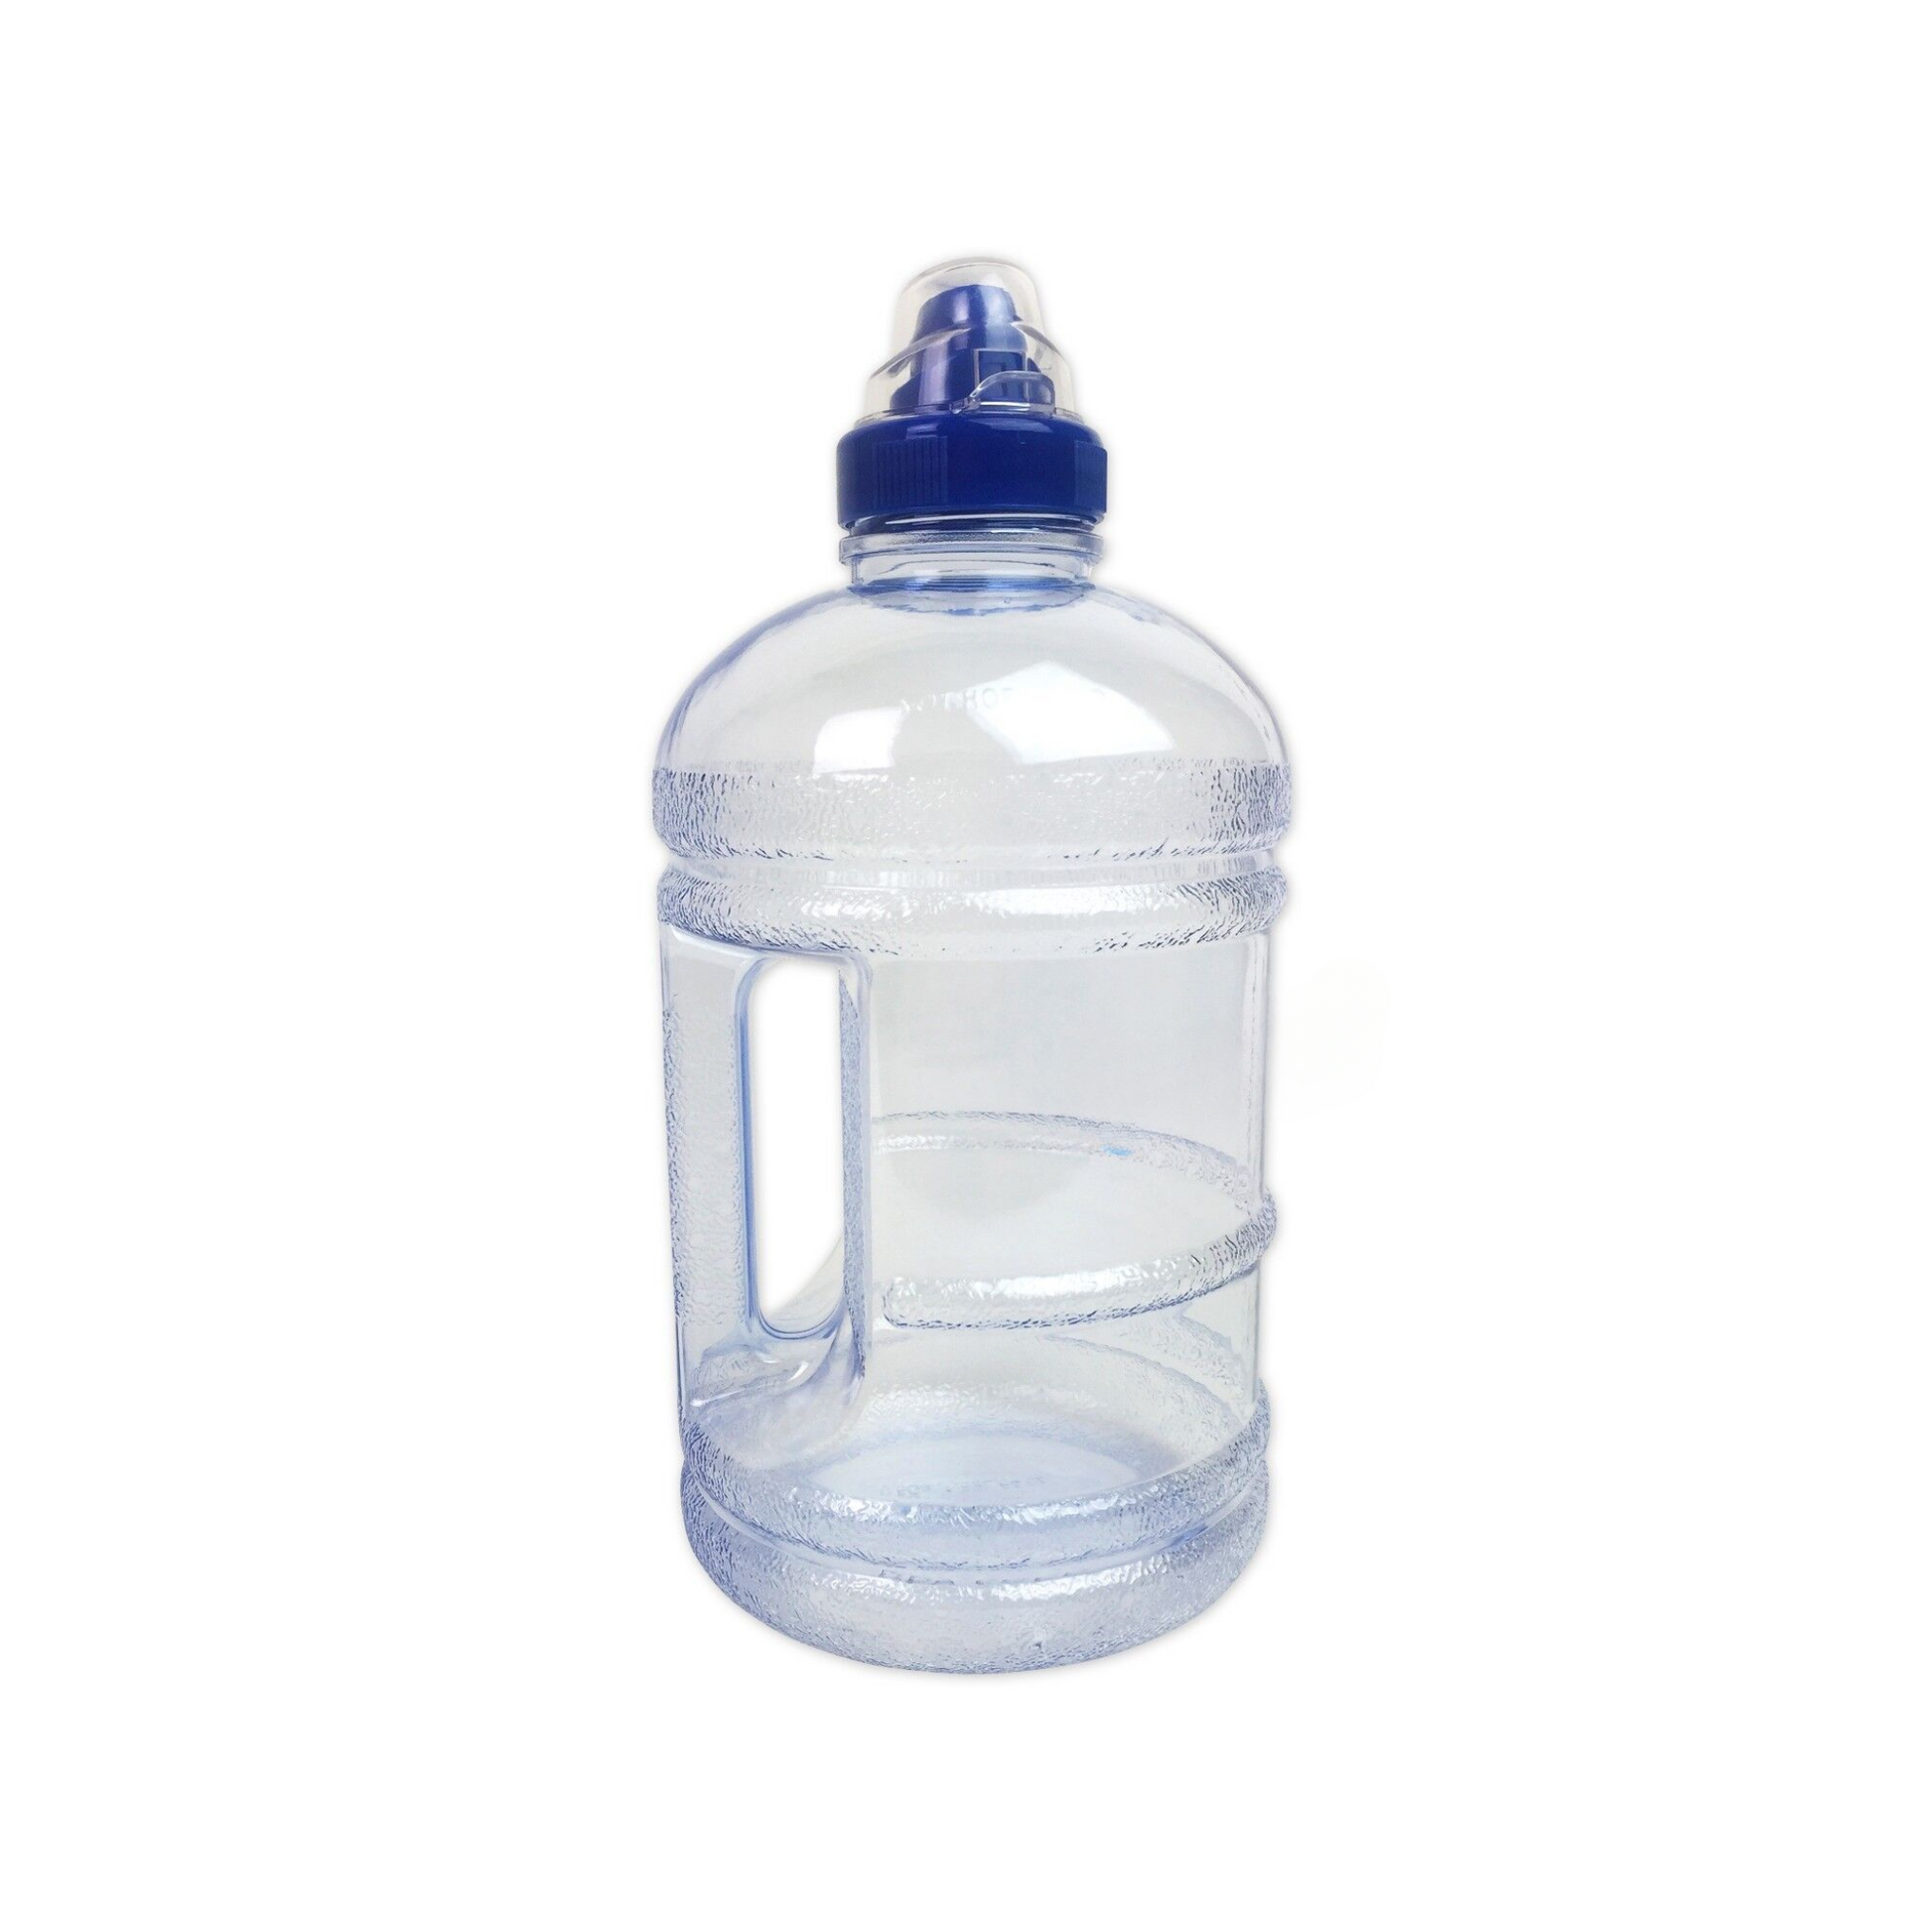 Half Gallon Water Jug with Sports Cap and Lightweight Design for Easy Transport (clear blue)